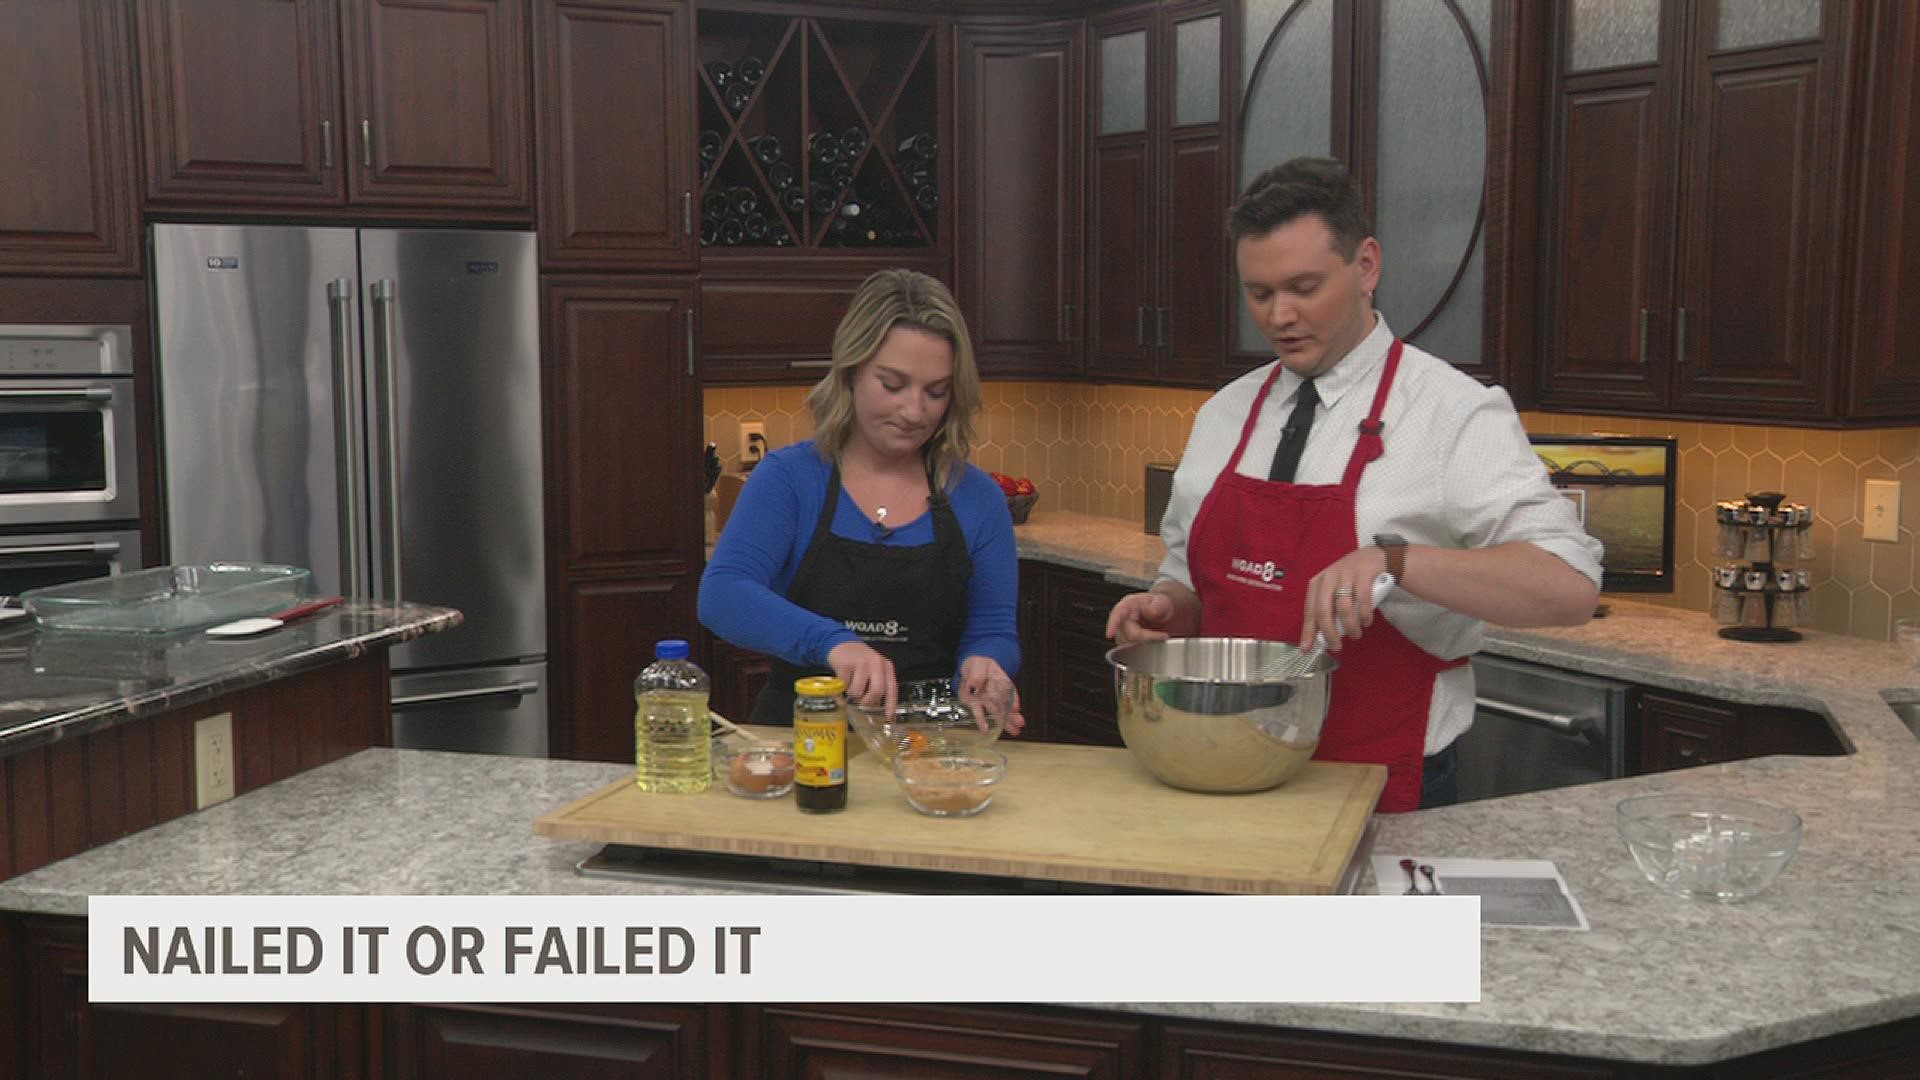 David and Morgan try making a gingerbread recipe from the 1840s! Do you think they nailed it? Or failed it?